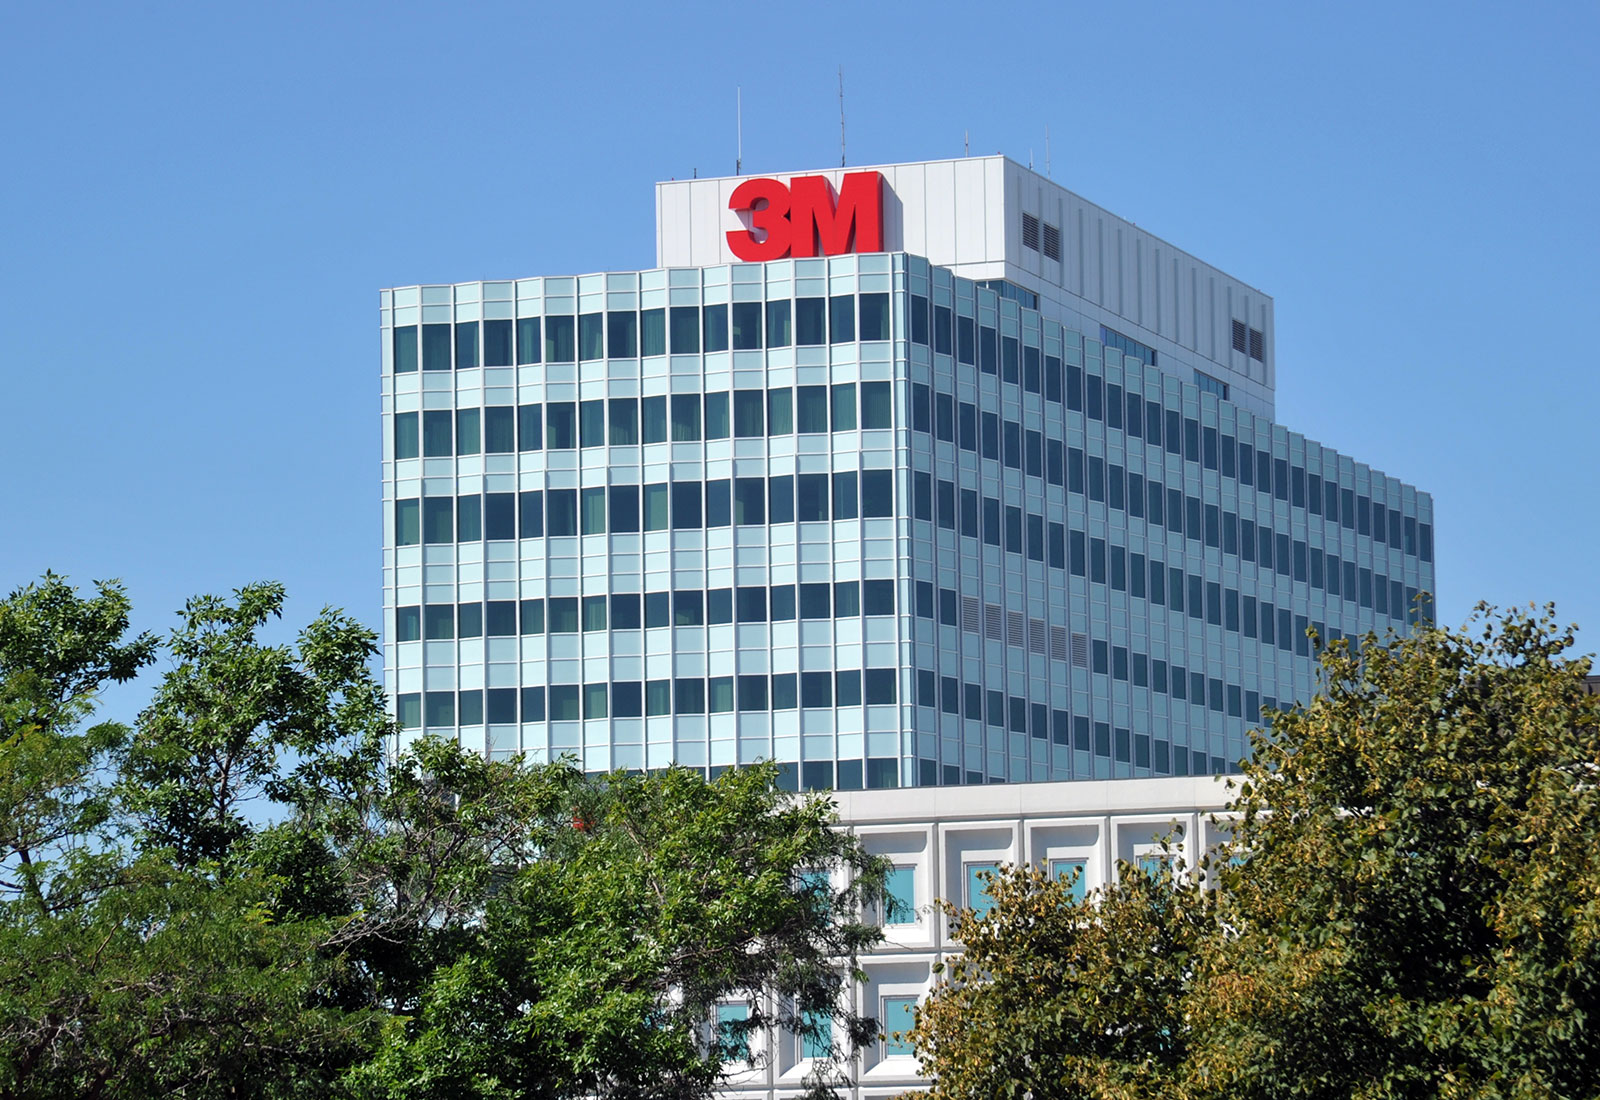 3M building with trees in foreground